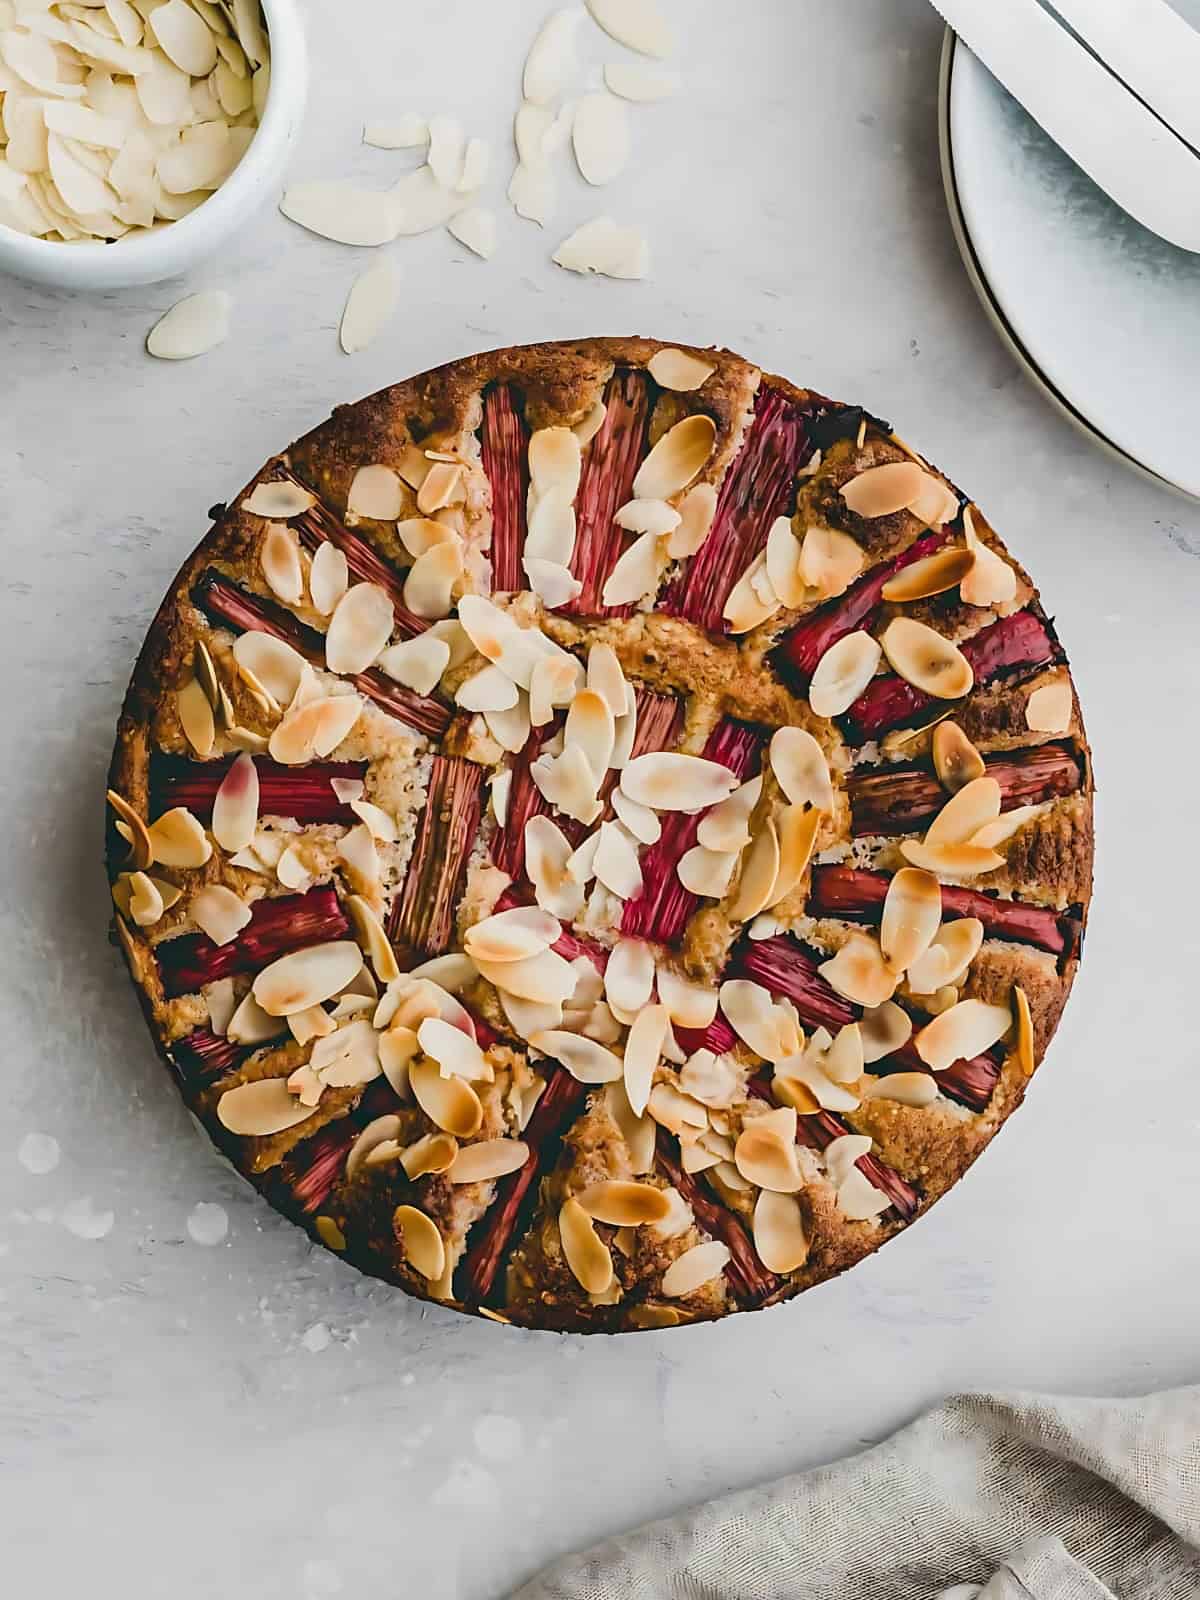 Rhubarb almond cake topped with almonds.